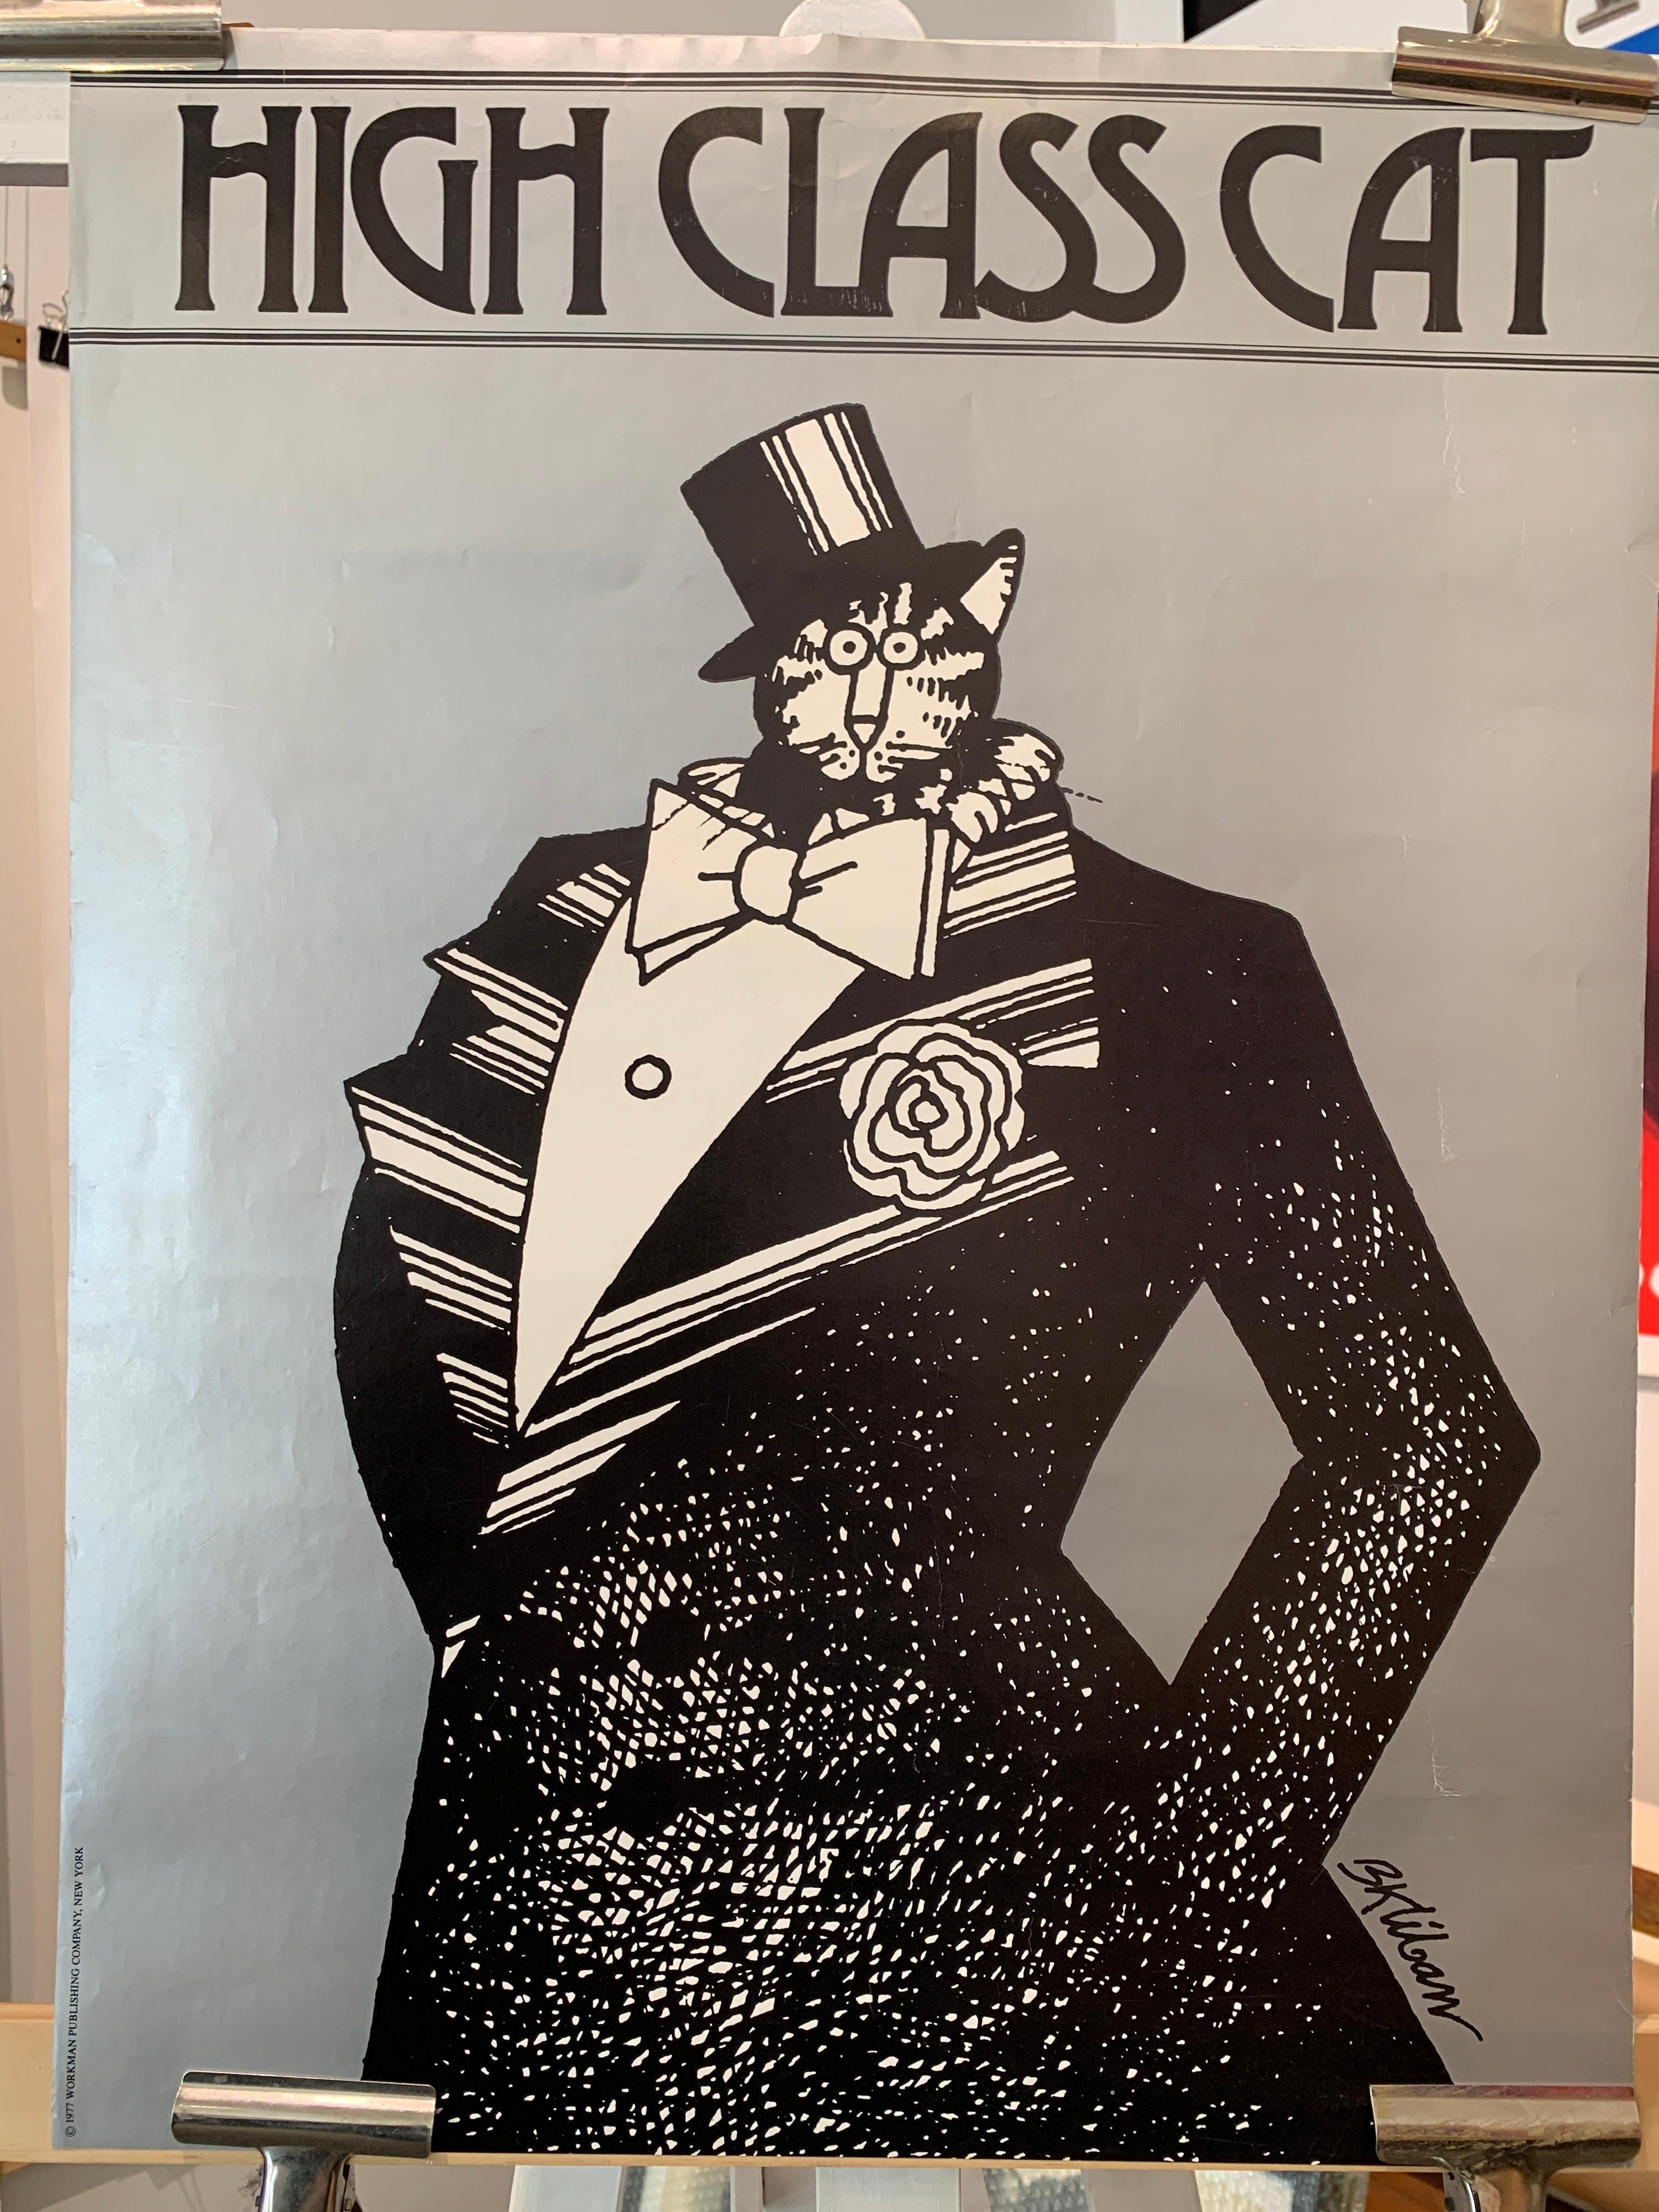 'High Class Cat', Original Vintage Poster by BK LIBAN, 1977, New York

This is an original vintage poster from 1977, the overall condition is good.  A perfect poster for any cat lover! The paper has a slight shine to